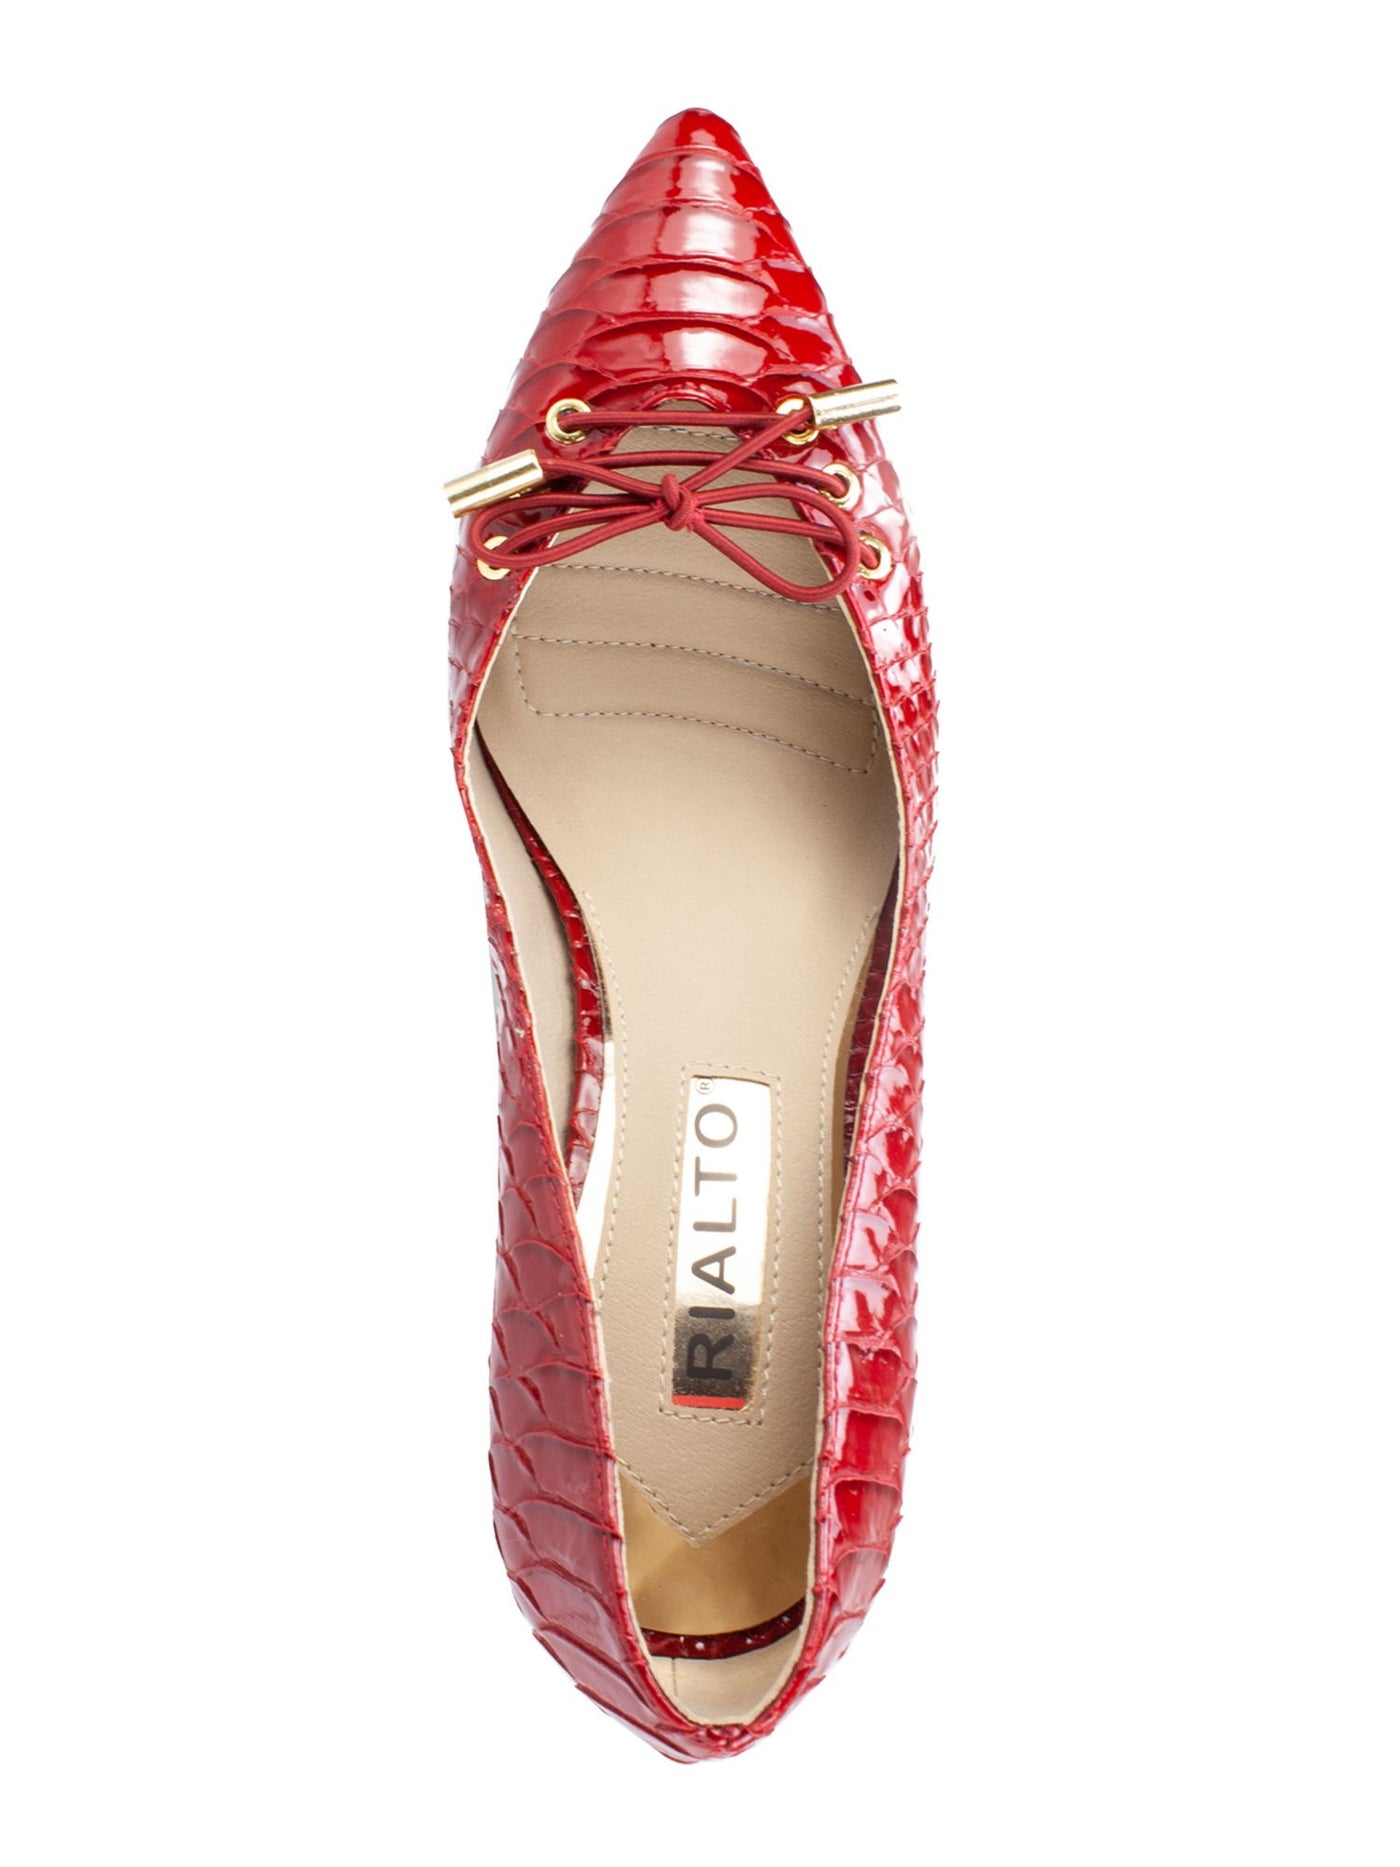 RIALTO Womens Red Snake Print Elastic Laces Padded Stretch Mully Pointed Toe Stiletto Lace-Up Pumps Shoes 7 M